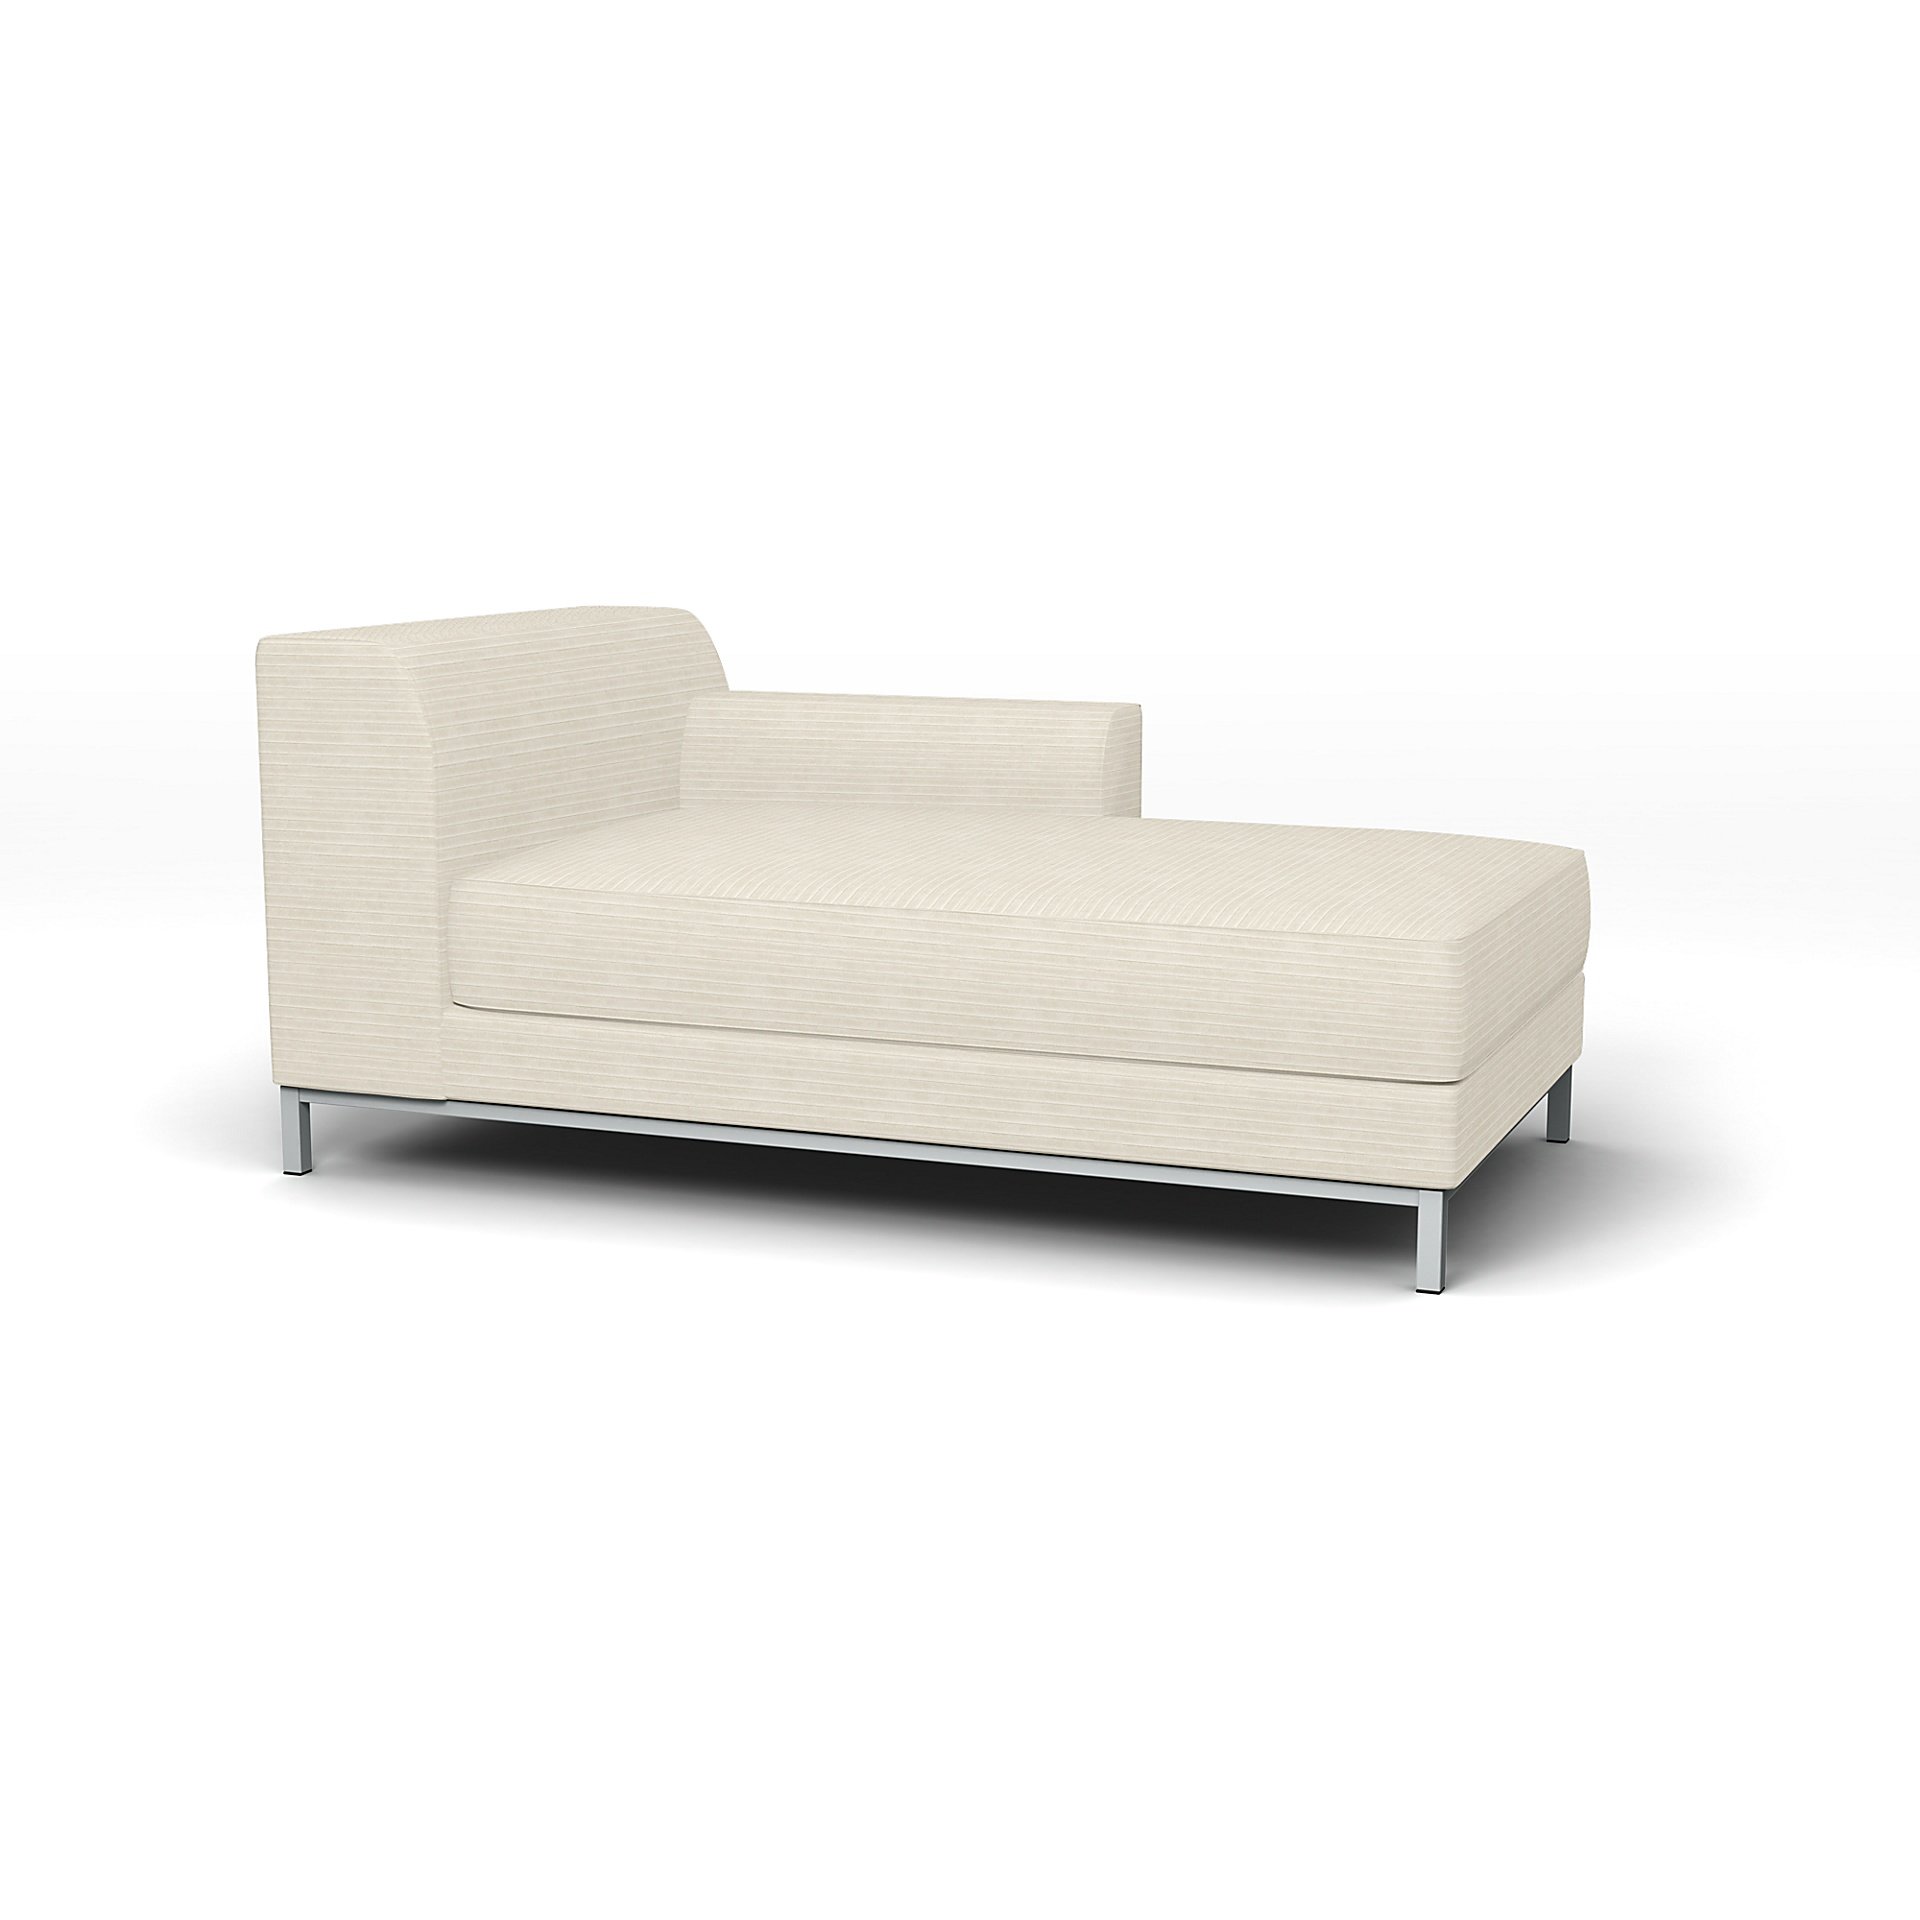 IKEA - Kramfors Chaise Longue with Right Arm Cover, Tofu, Corduroy - Bemz